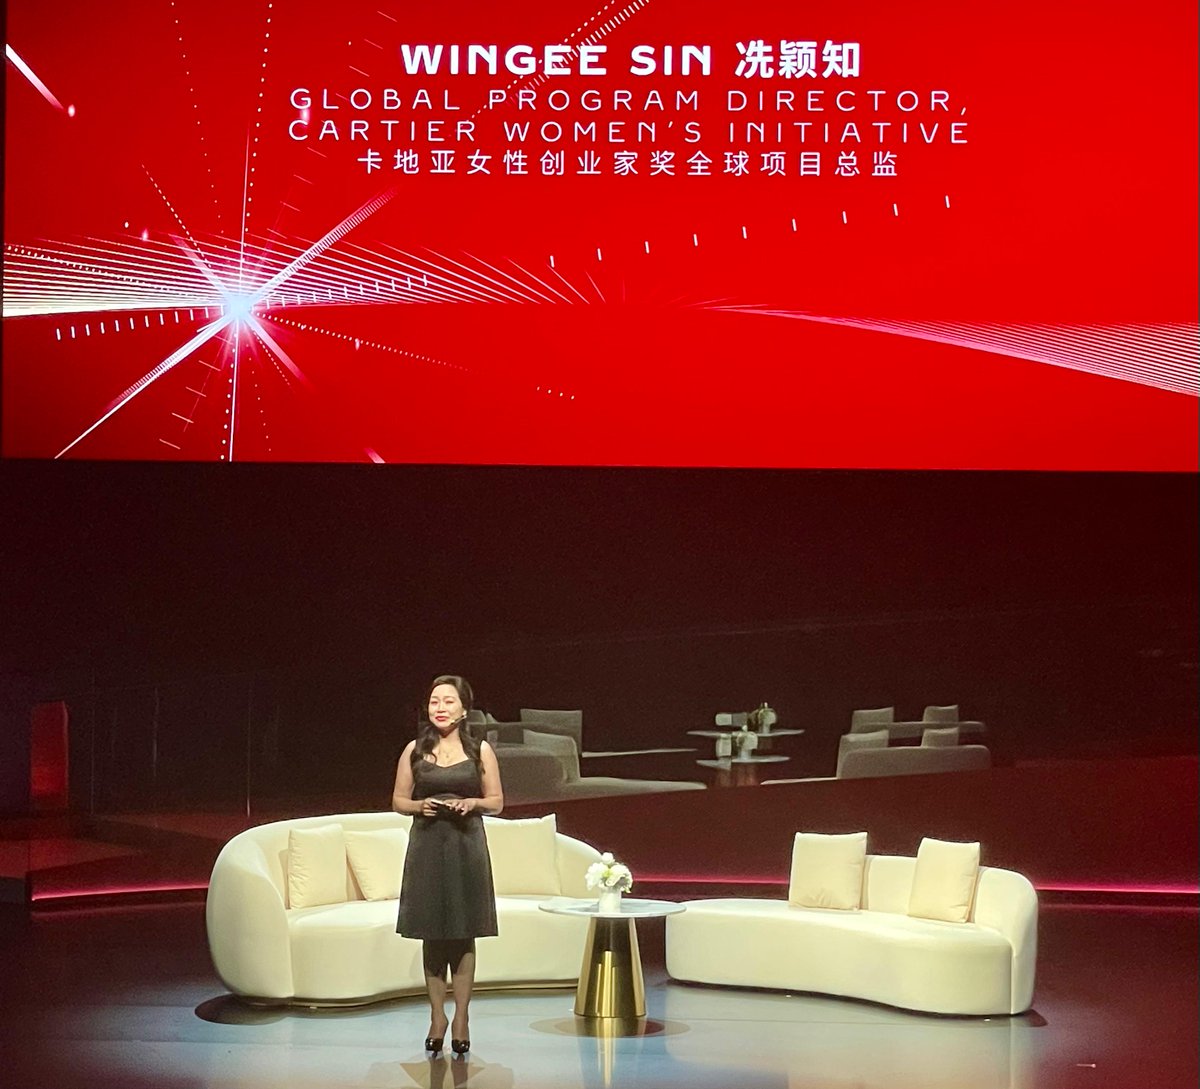 'The social and environmental change we want to see in the world requires choices - courageous choices.' Wingee Sin of the Cartier Women's Initiative emphasizes the ongoing effort to narrow the gender gap. Let's stay focused on the path ahead. #ForcesForGood